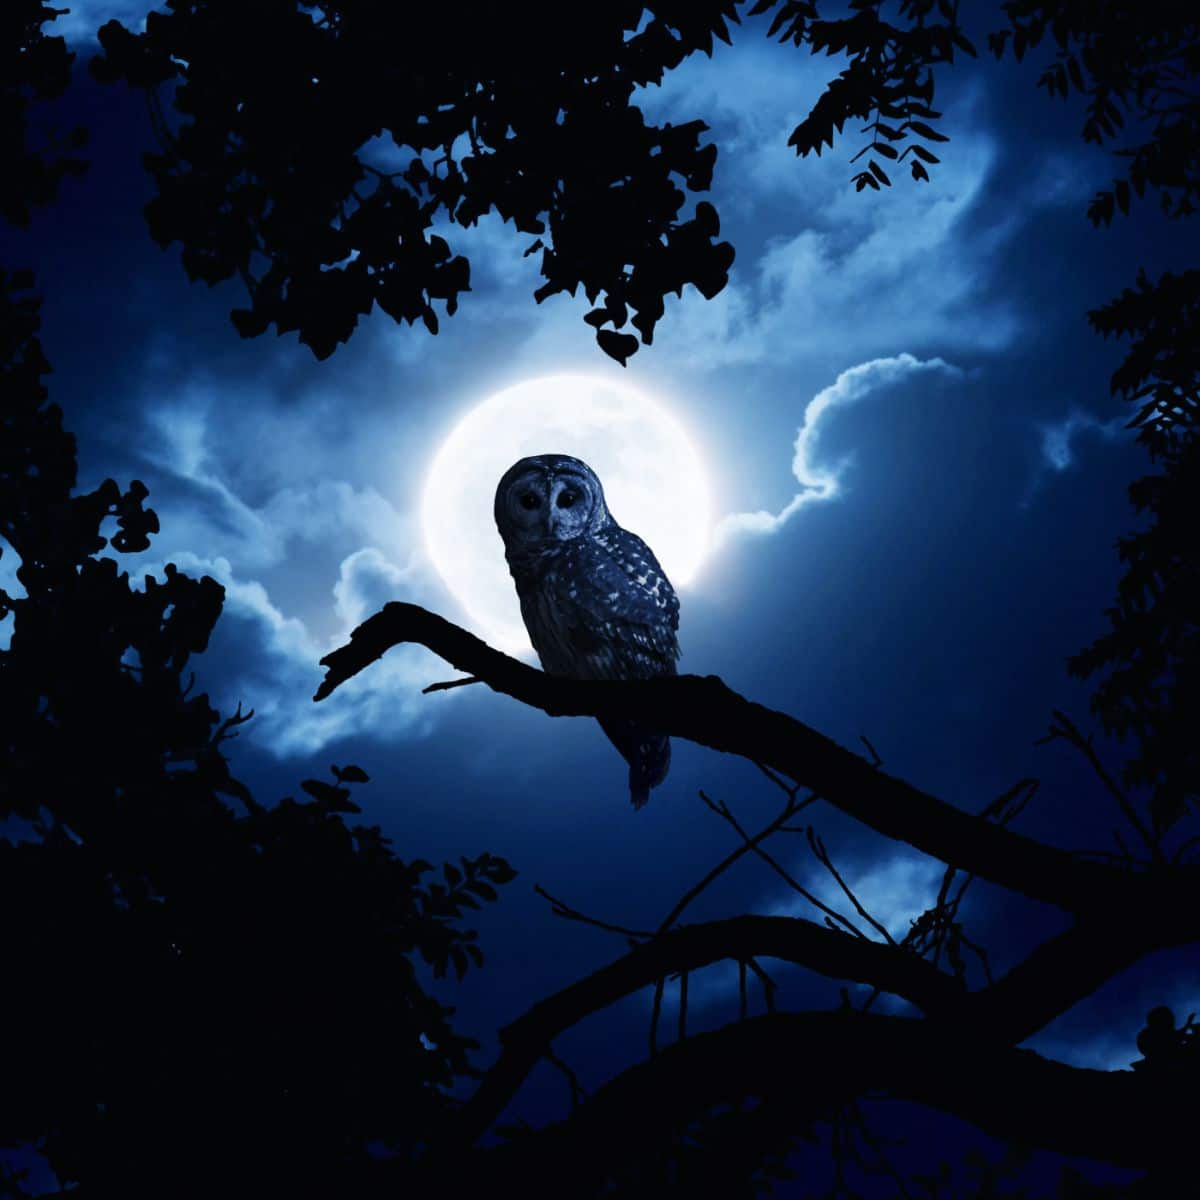 Owl Hooting Meaning